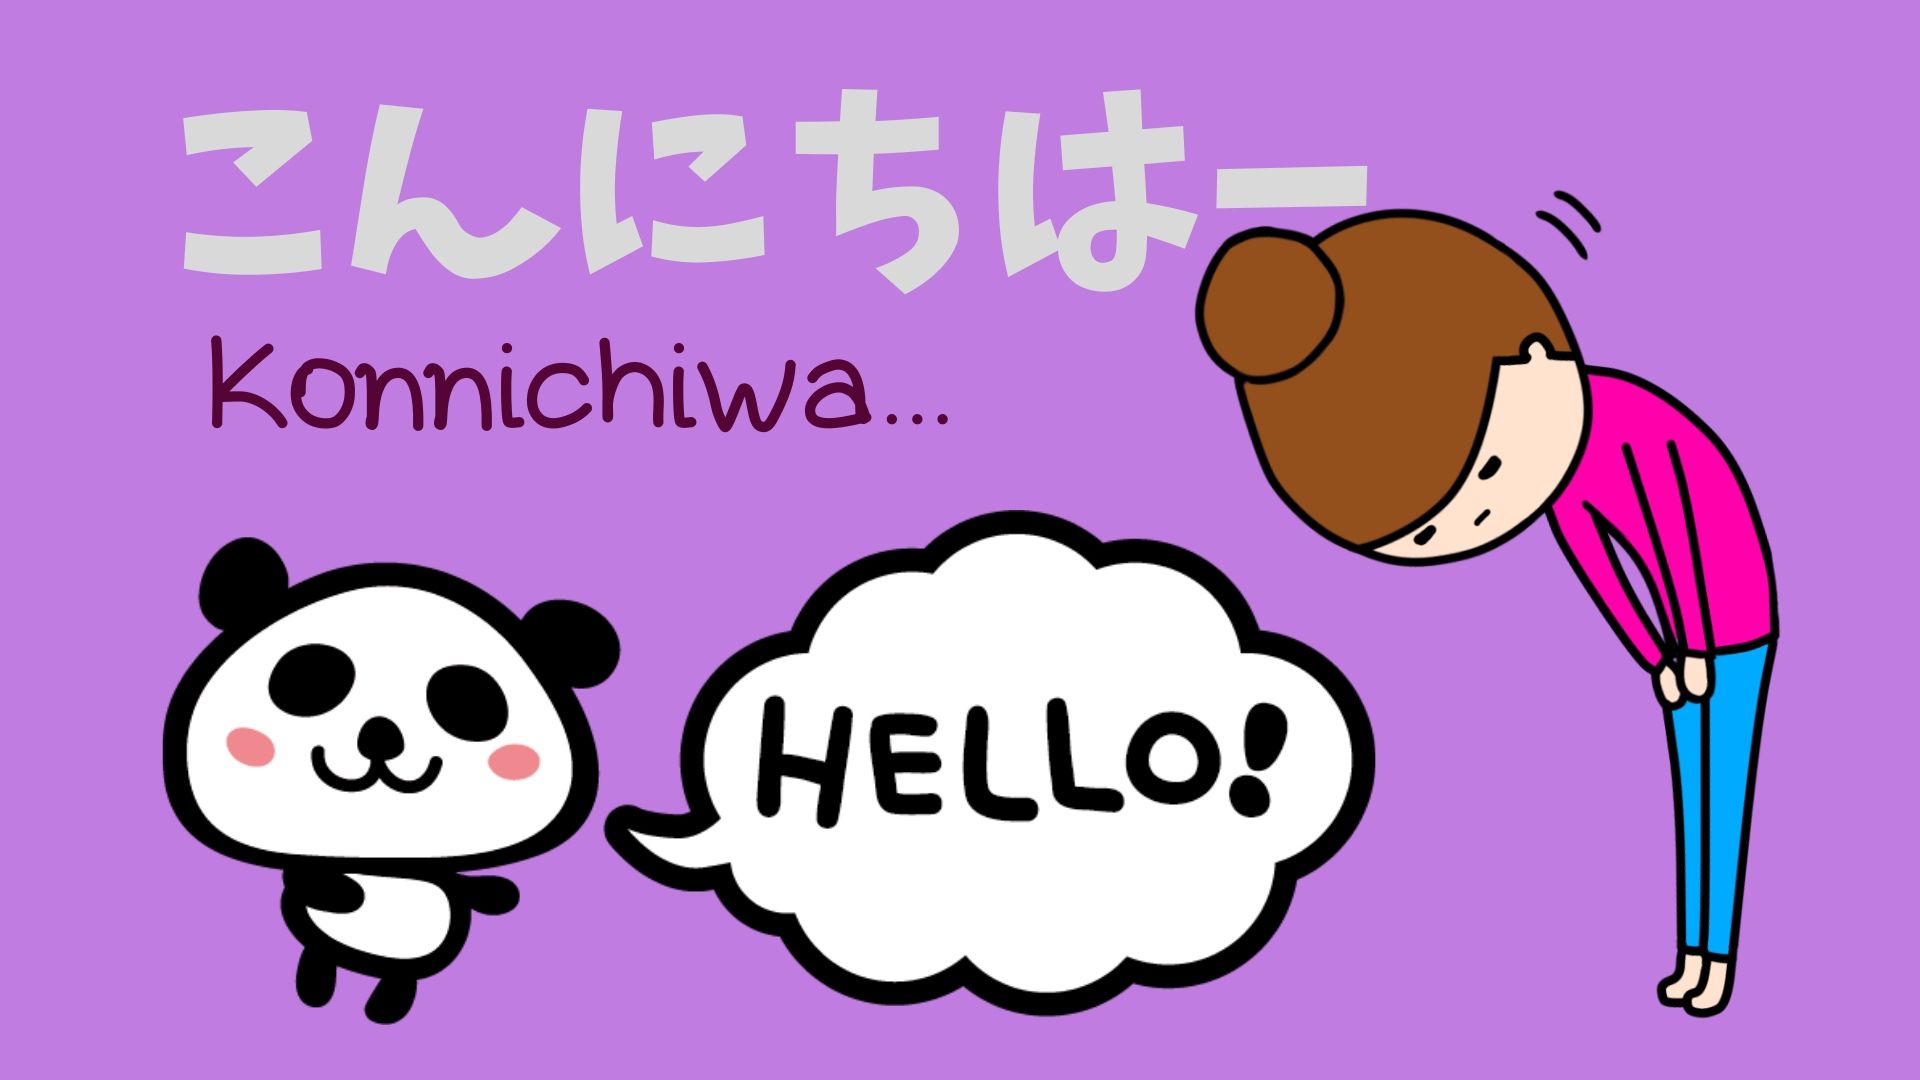 How do you say “Hello” or “Hi” in Japanese?